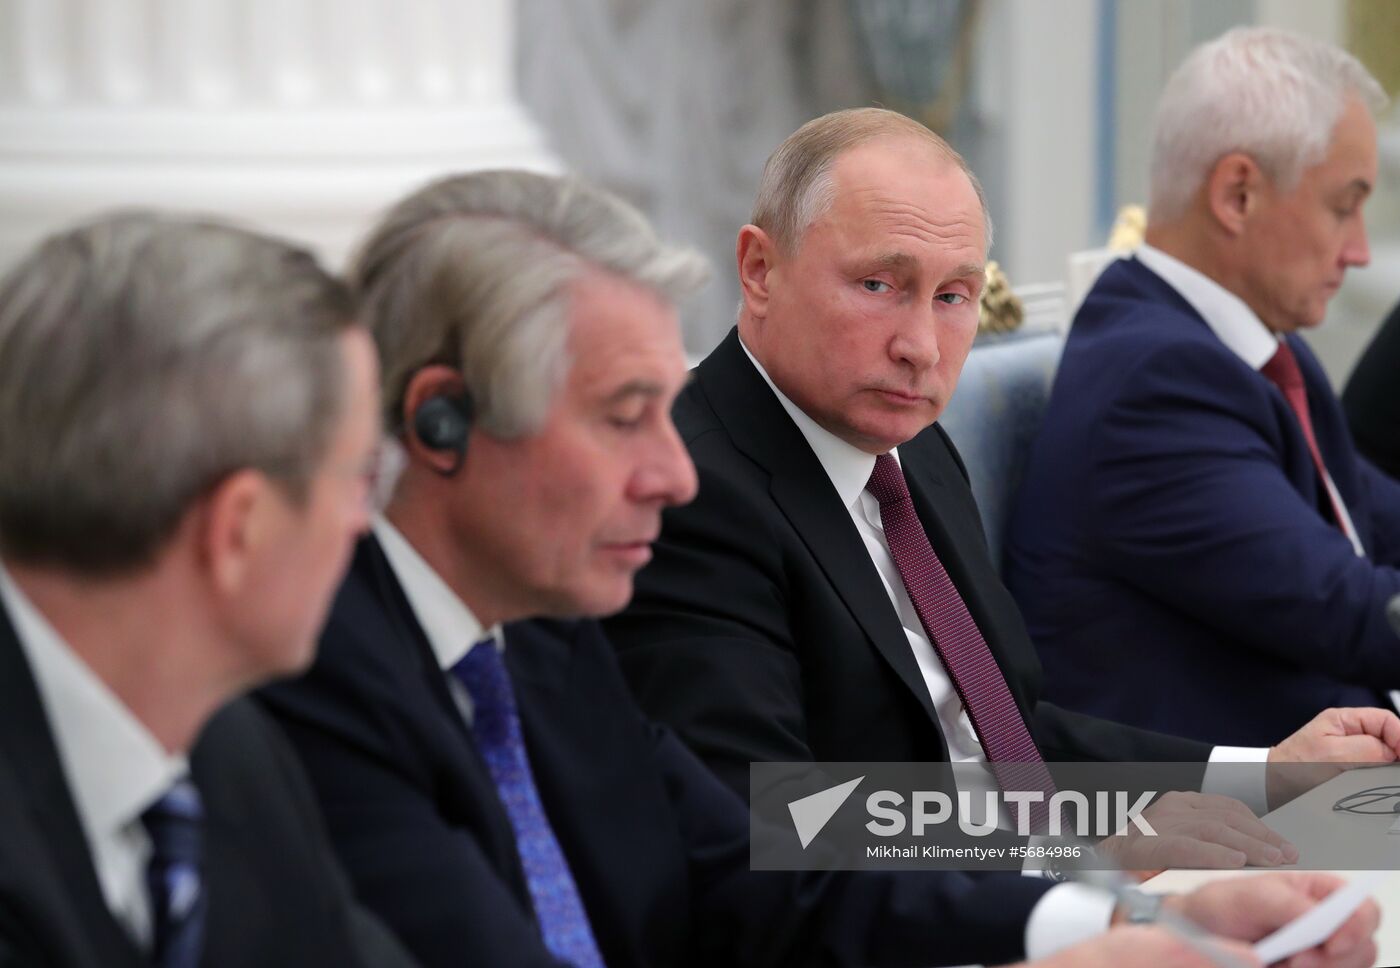 President Putin meets with leaders of Germany's Committee on Eastern European Economic Relations